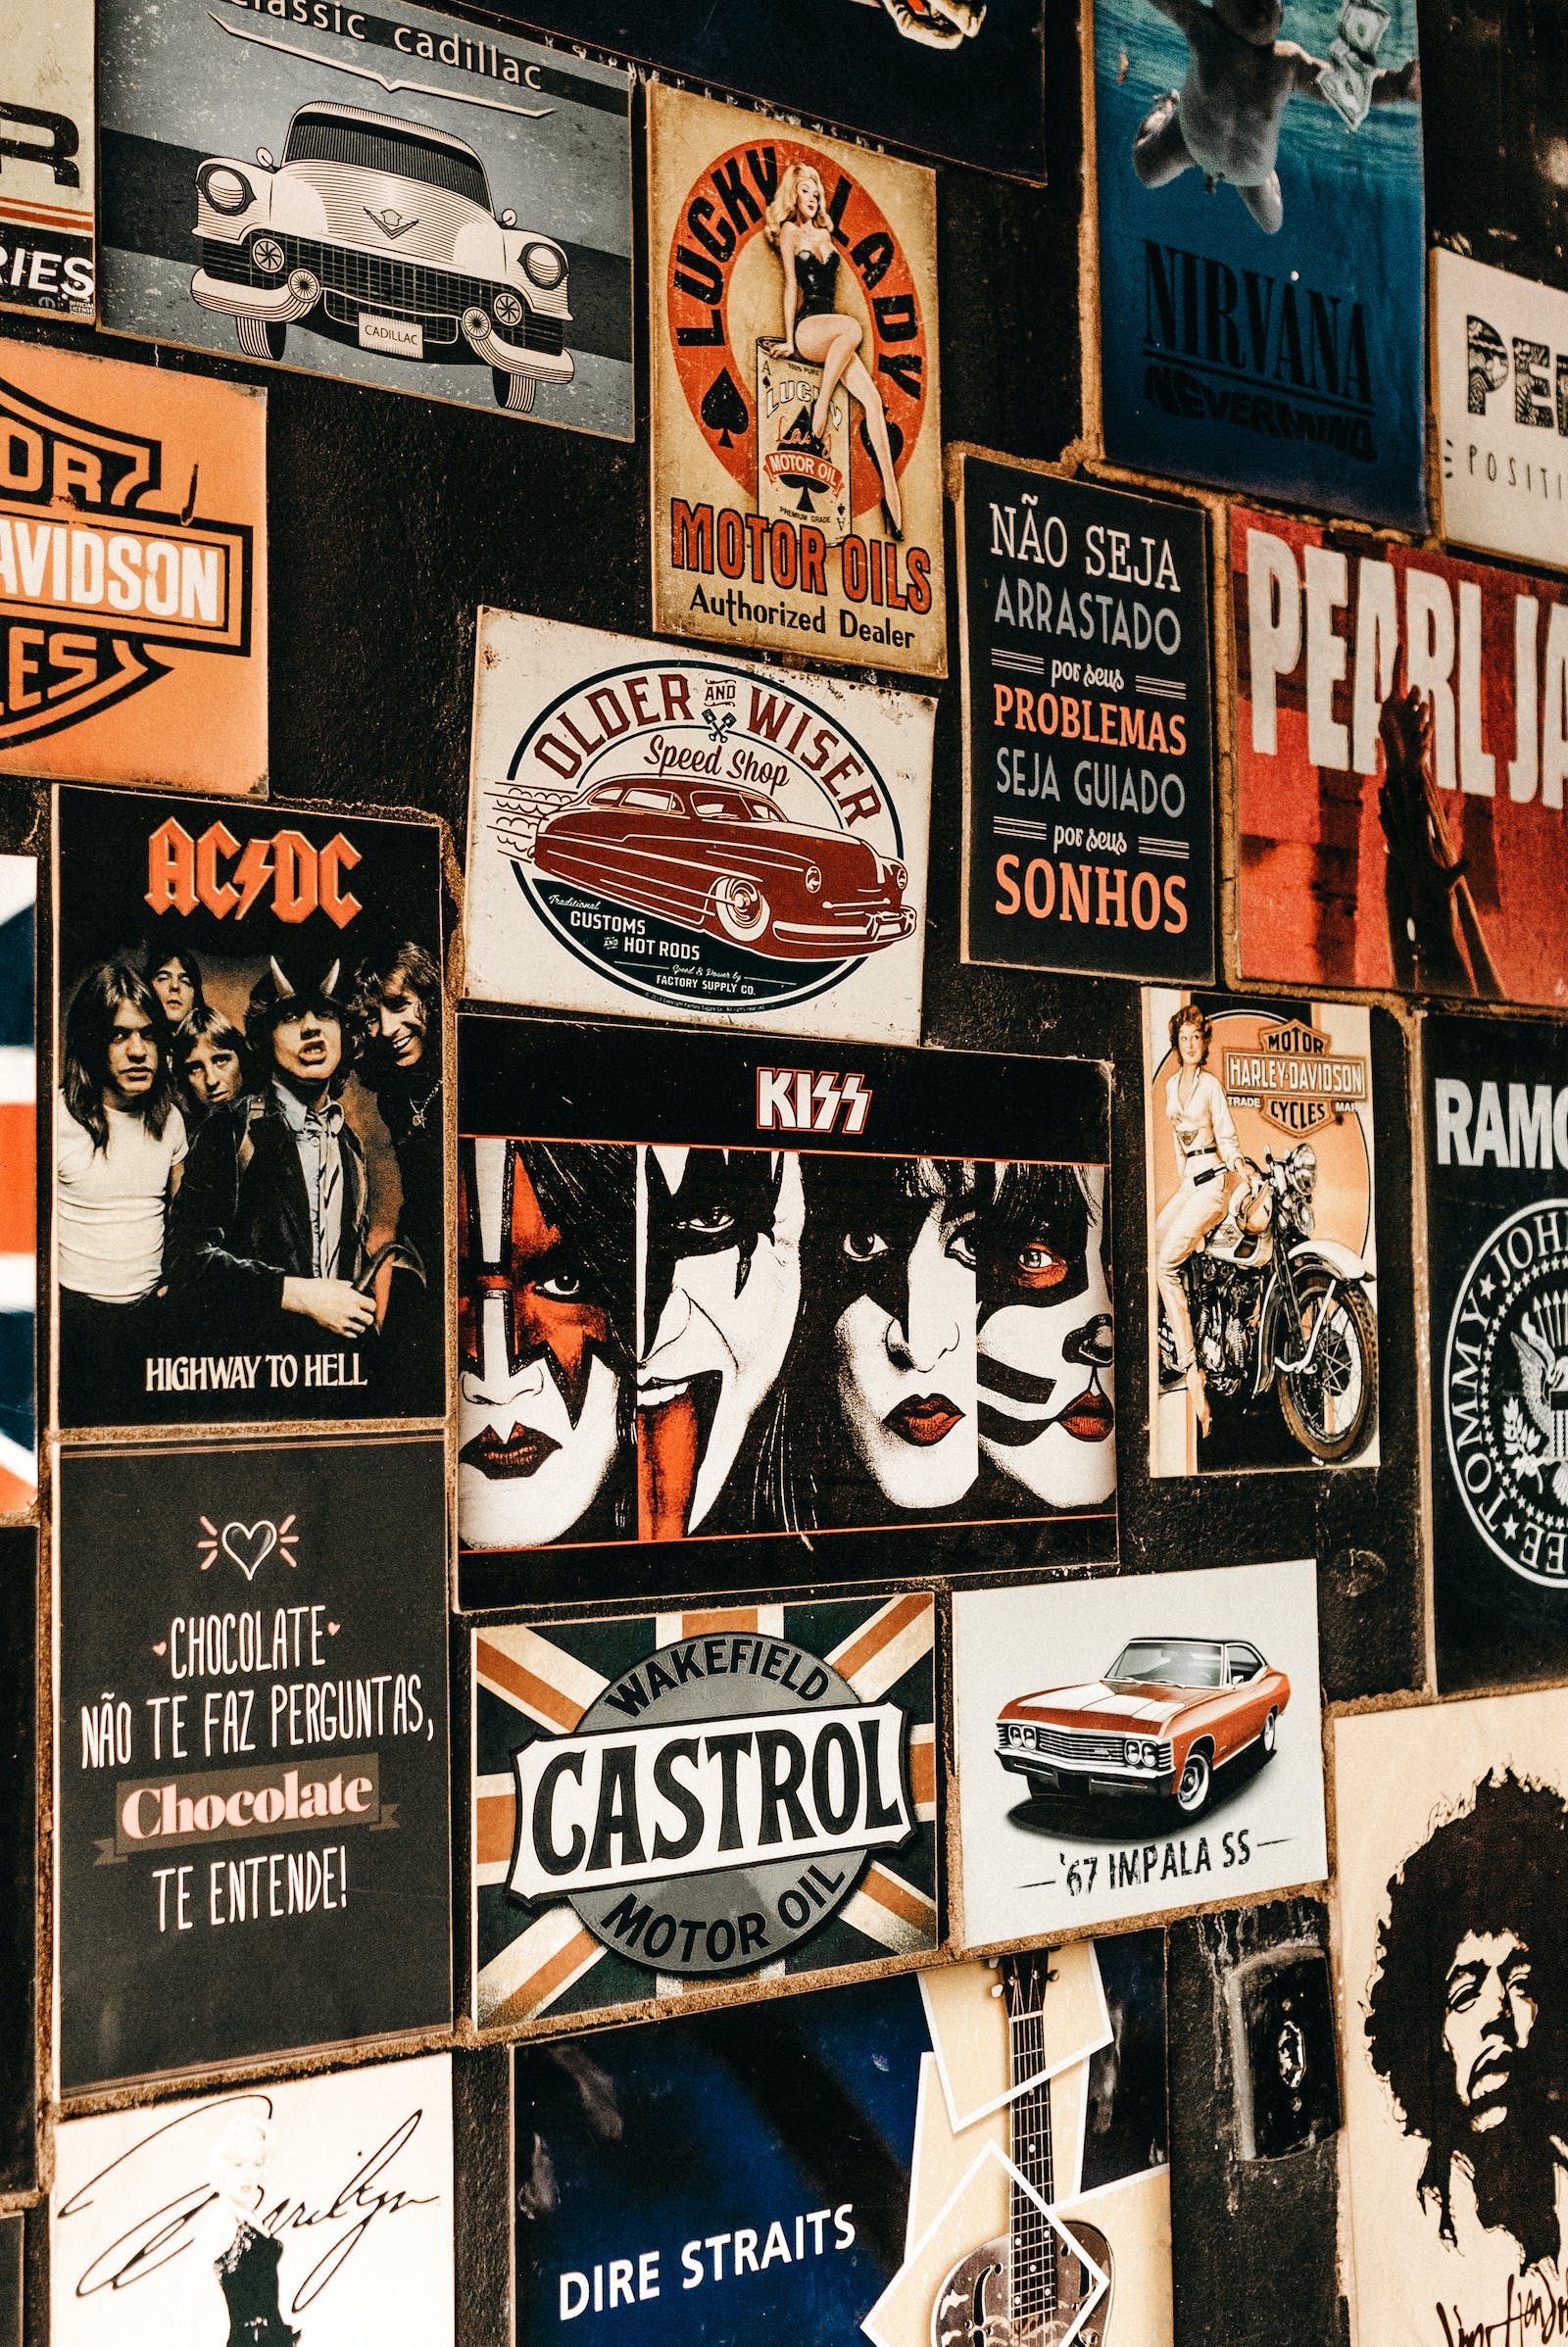 A wall displaying famous posters and advertisements